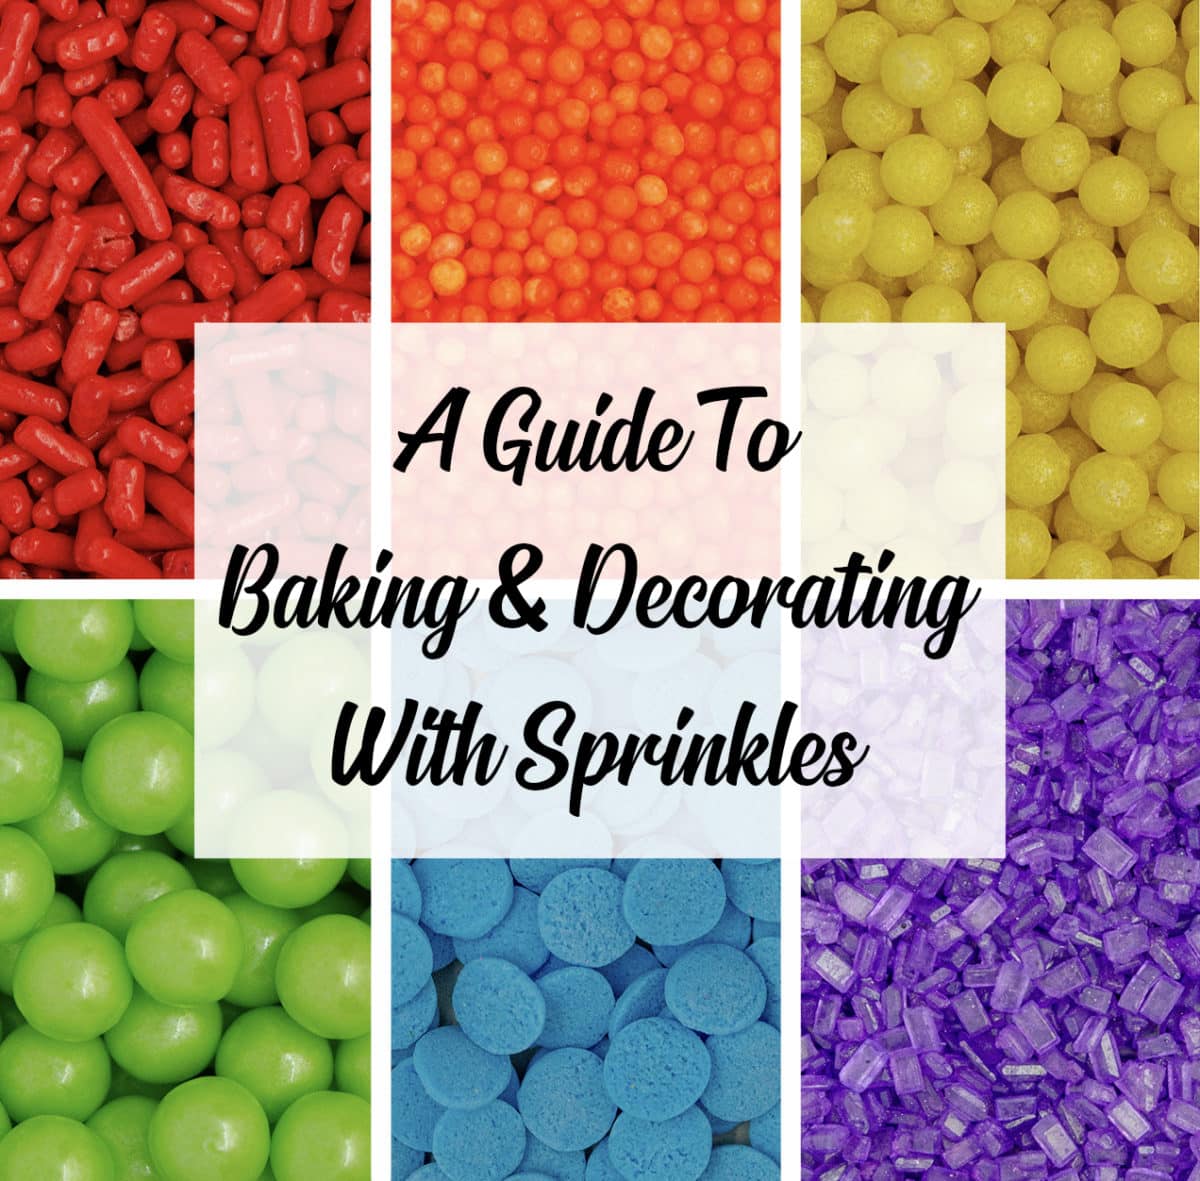 A Guide to Baking and Decorating With Sprinkles: A comprehensive overview of all the different types of sprinkles commonly found in premium sprinkle blends and how to use each of them when baking or decorating treats. via @frshaprilflours